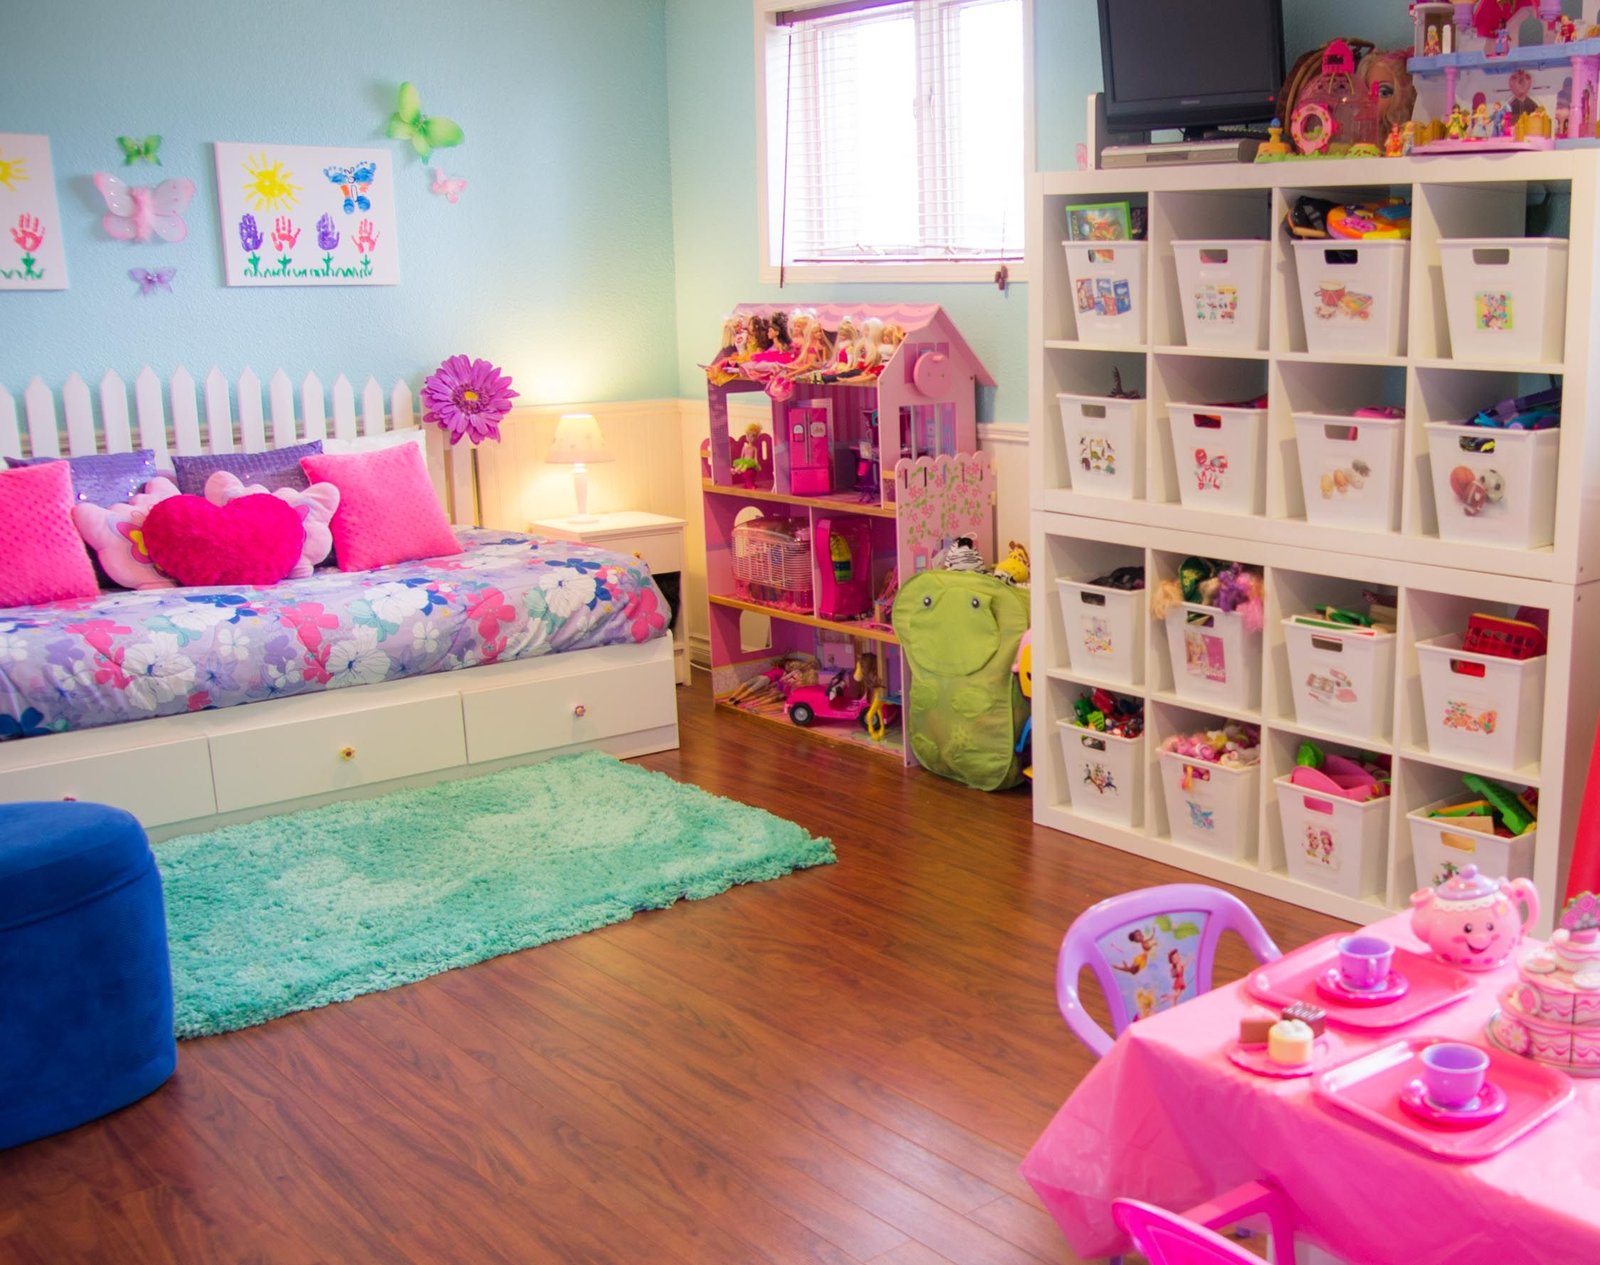 11 Ways to Organize Your Kid's Toy Room